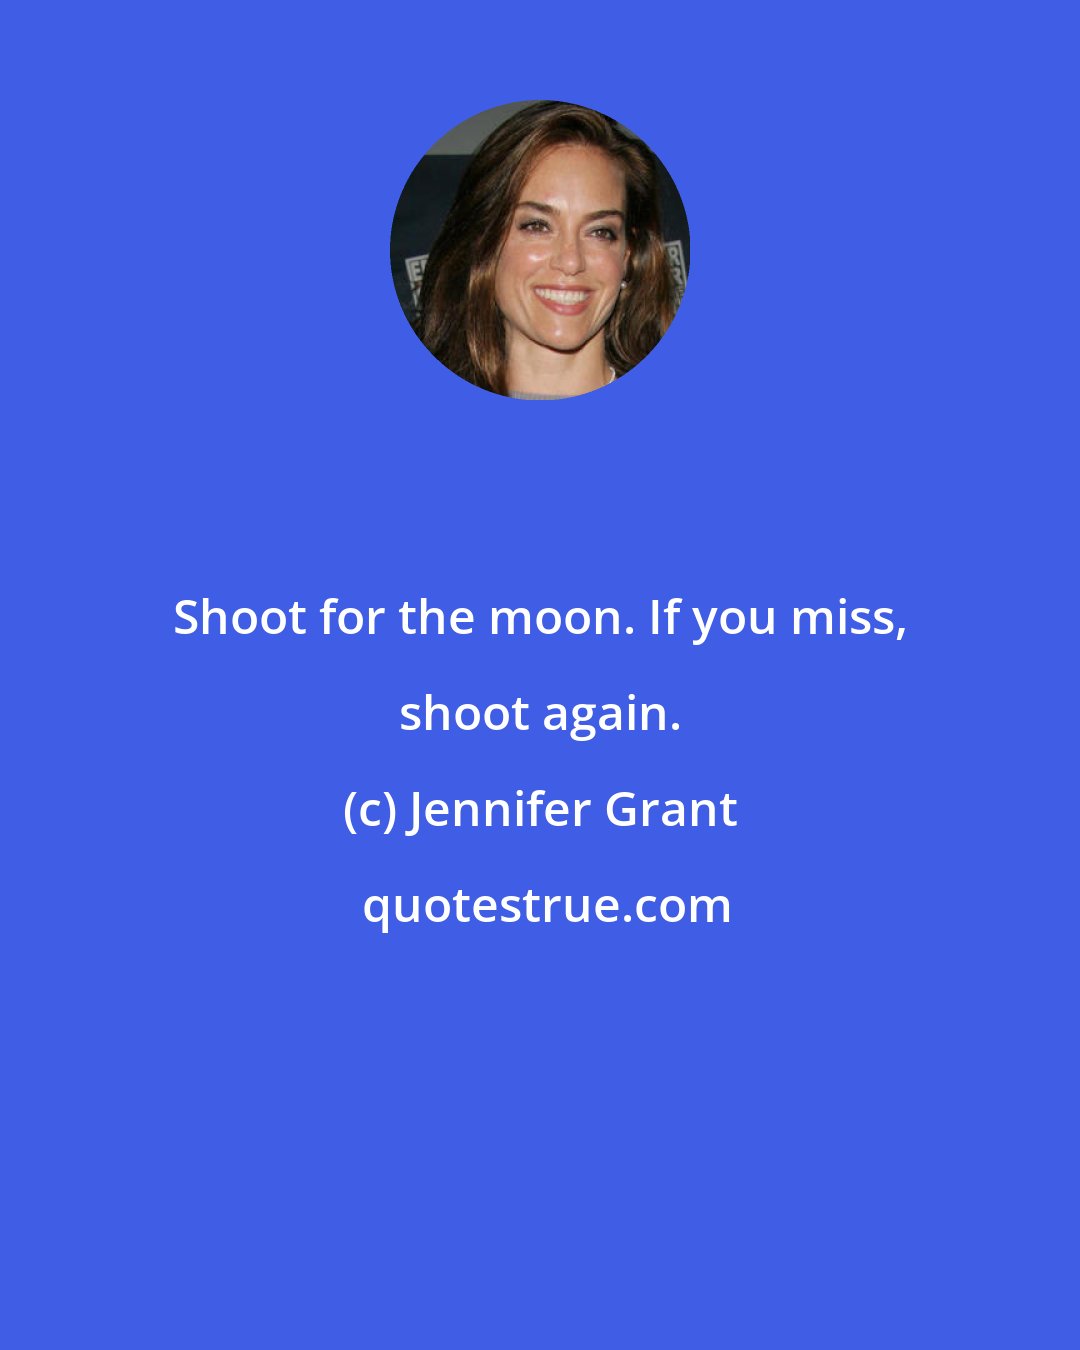 Jennifer Grant: Shoot for the moon. If you miss, shoot again.